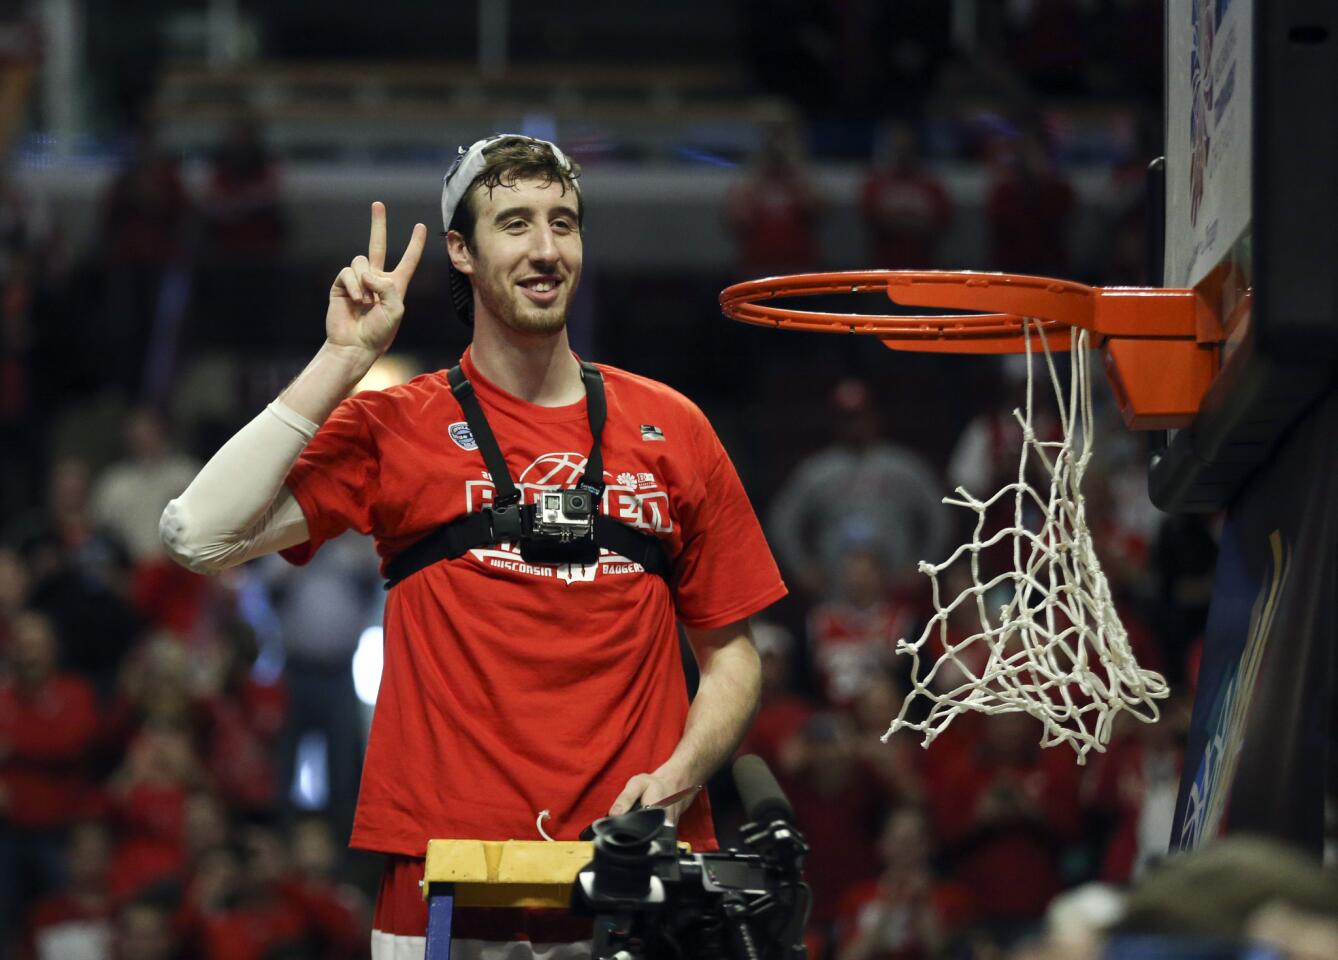 Wisconsin forward Frank Kaminsky flashes the victory sign after cutting down the net following his team's win over Michigan State.